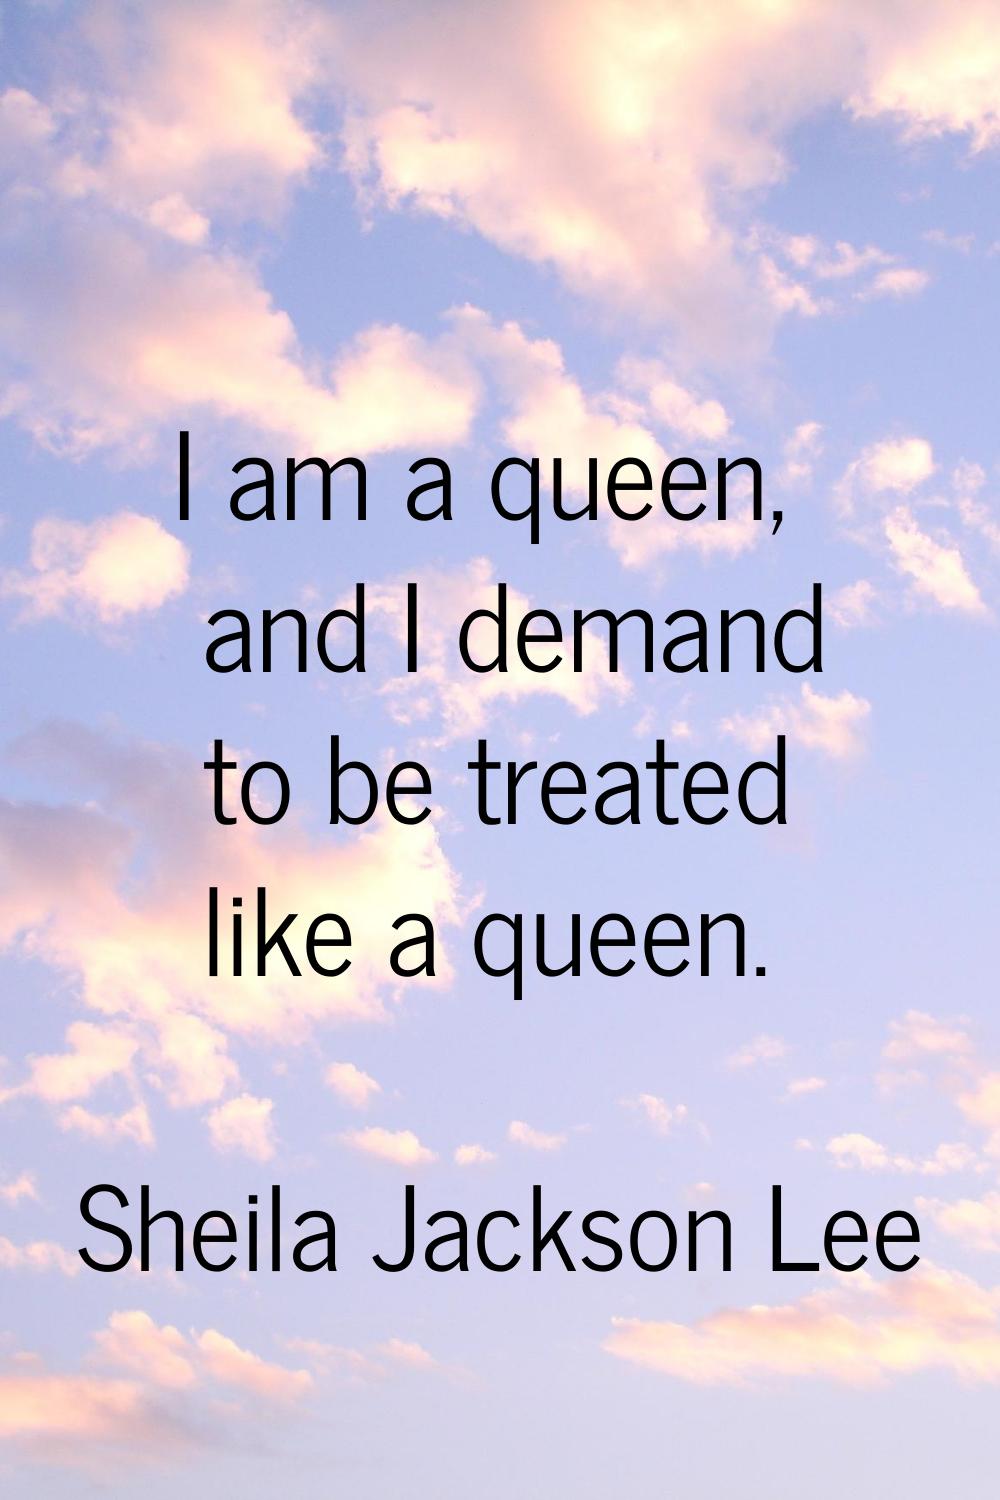 I am a queen, and I demand to be treated like a queen.